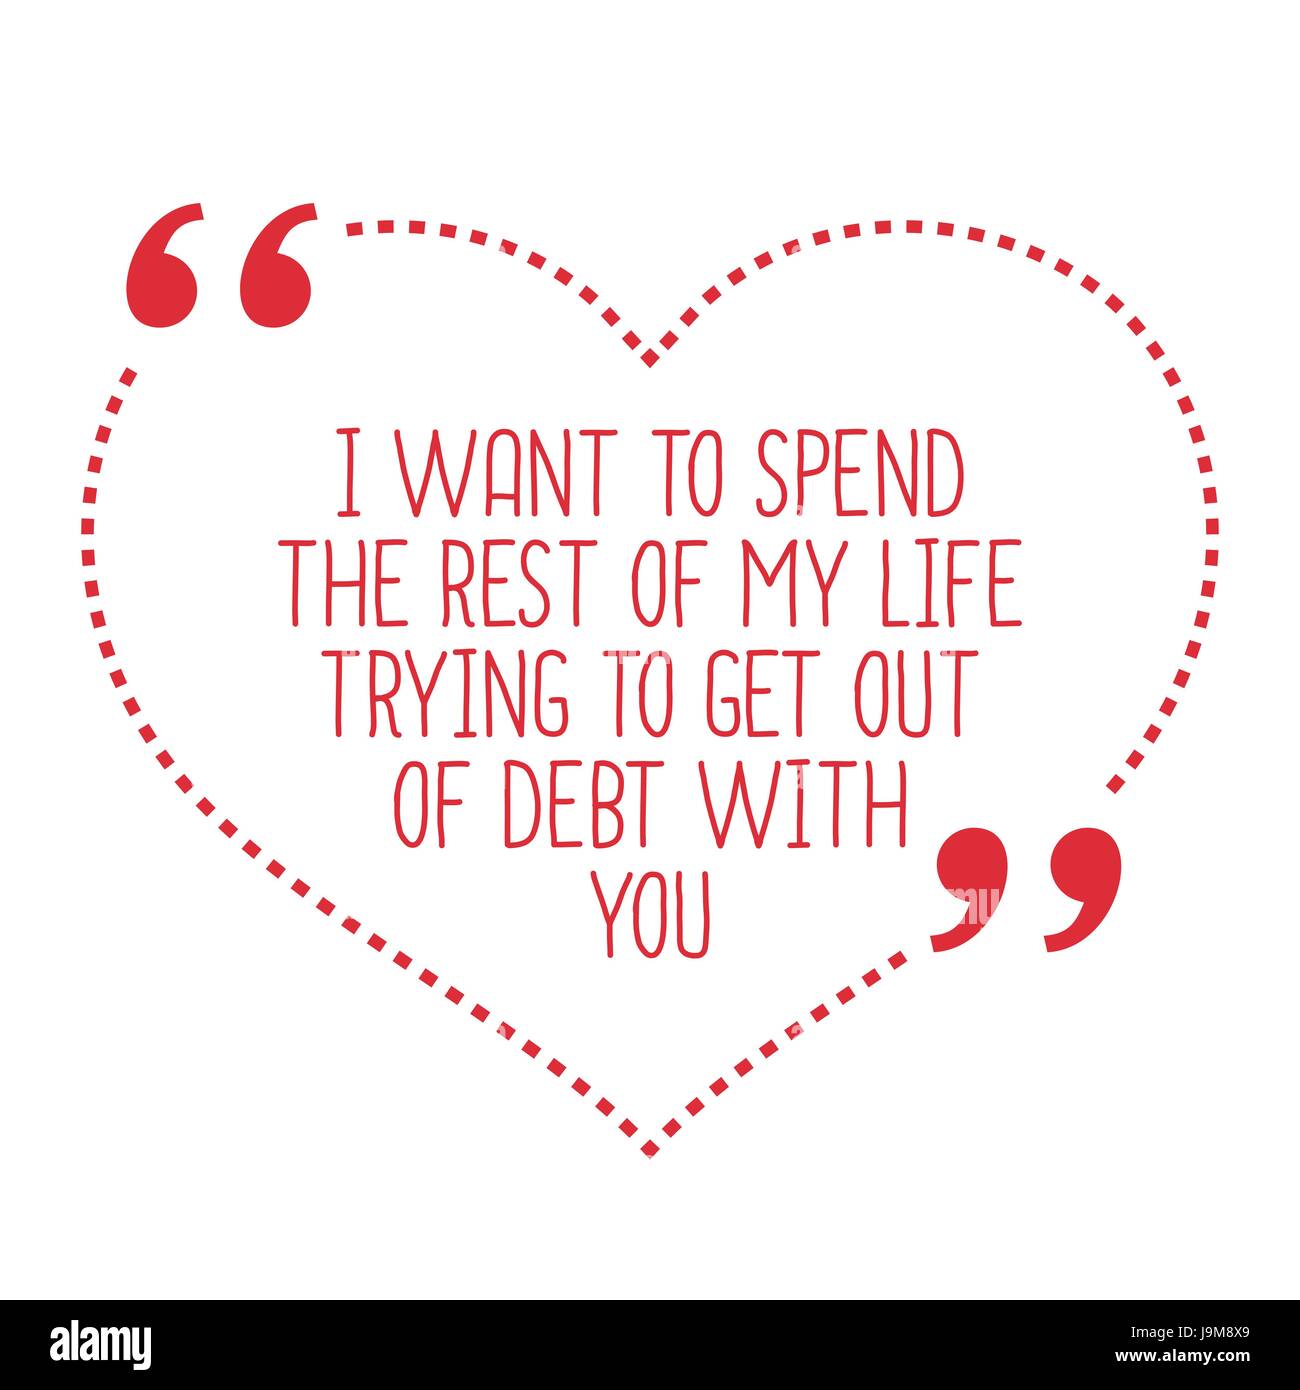 Funny love quote. I want to spend the rest of my life trying to get out of debt with you. Simple trendy design. Stock Vector